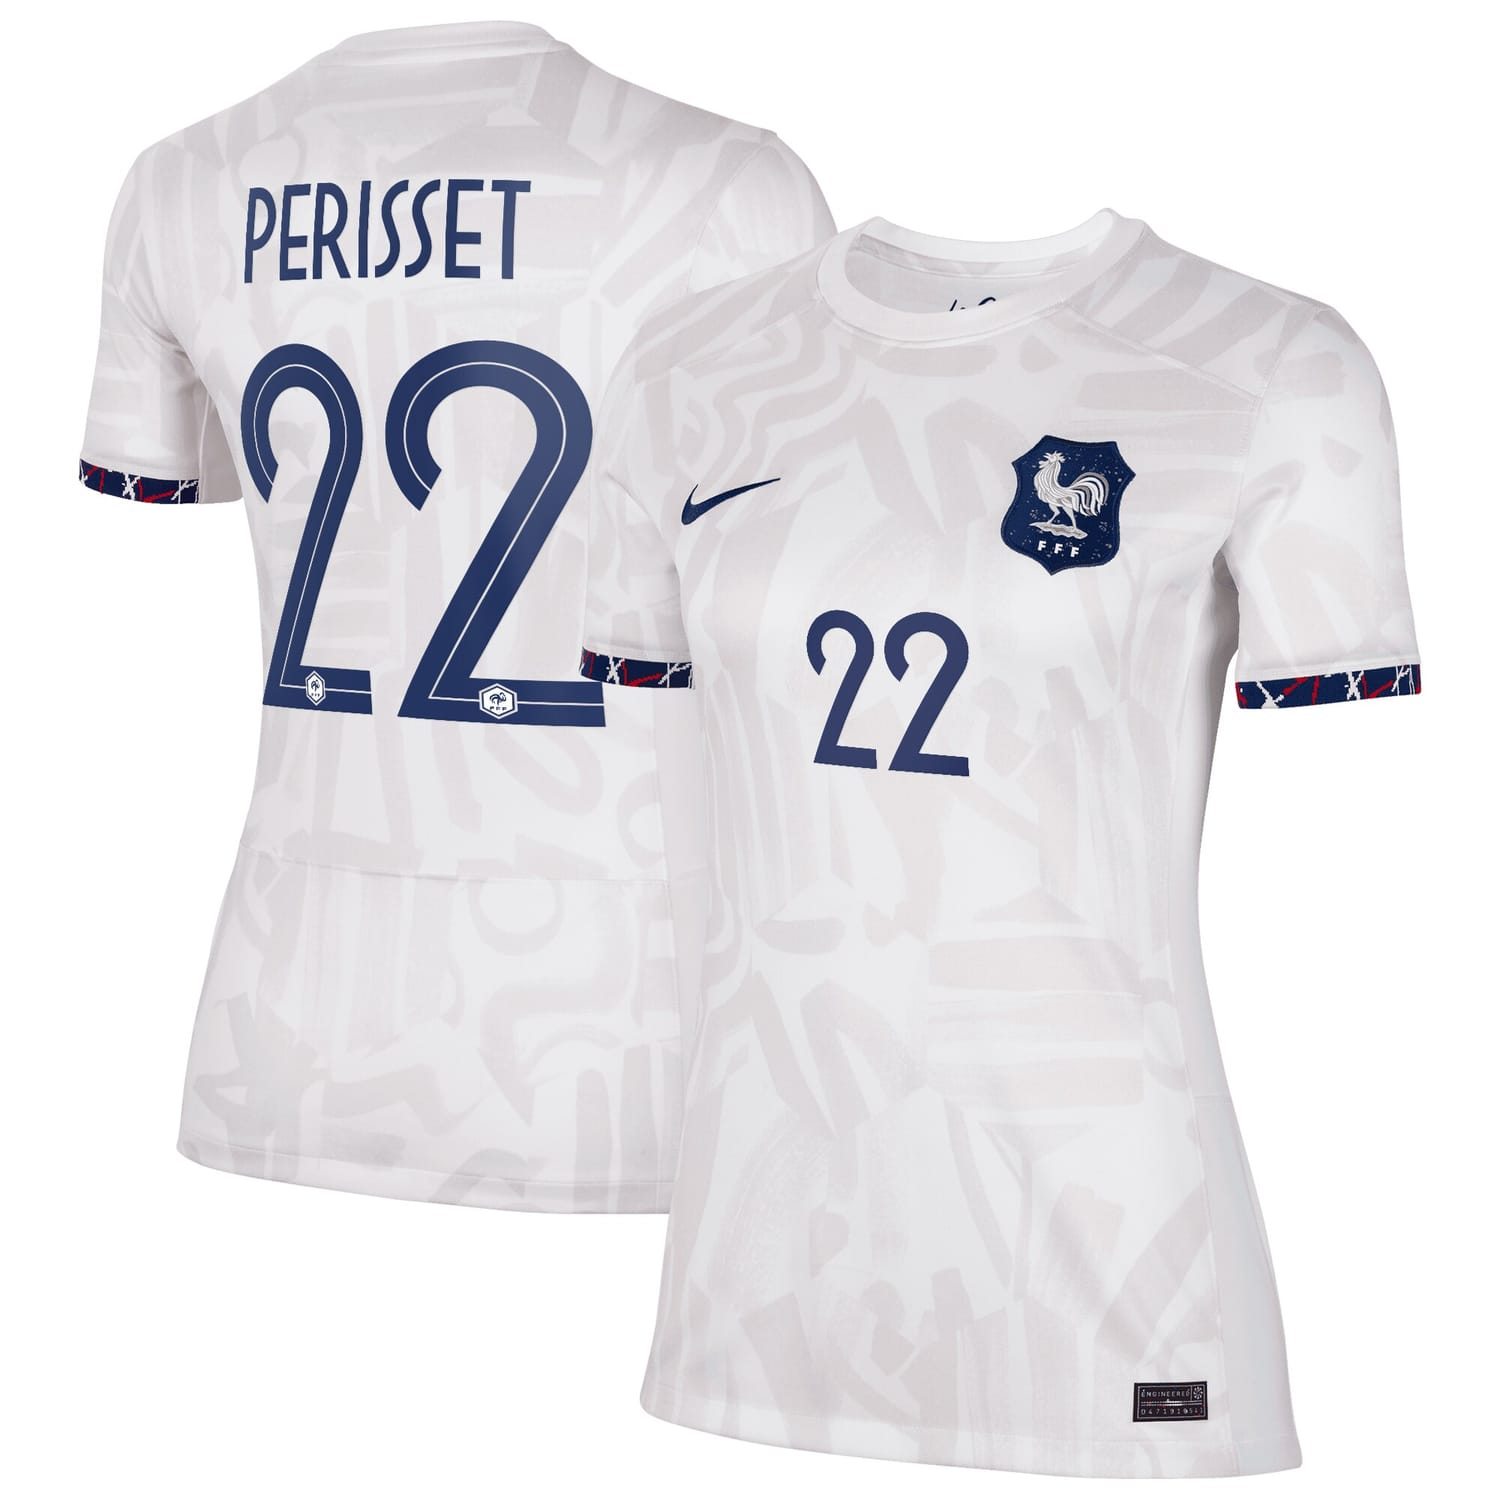 France National Team Away Jersey Shirt 2023-24 player Eve Perisset 22 printing for Women